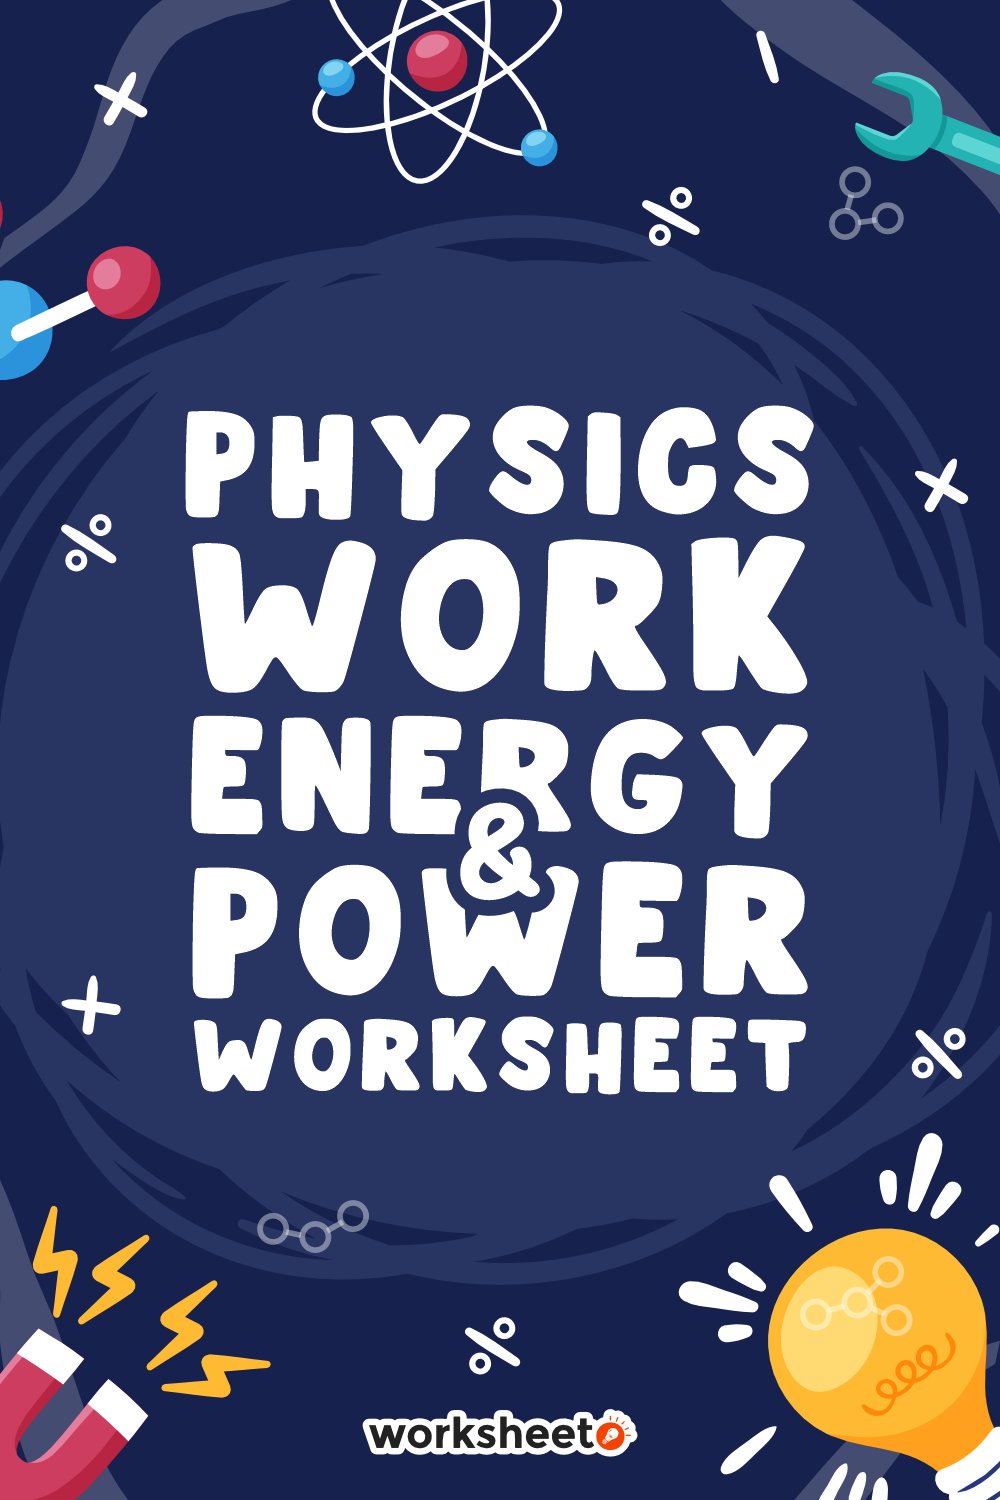 15 Images of Physics Work Energy And Power Worksheet